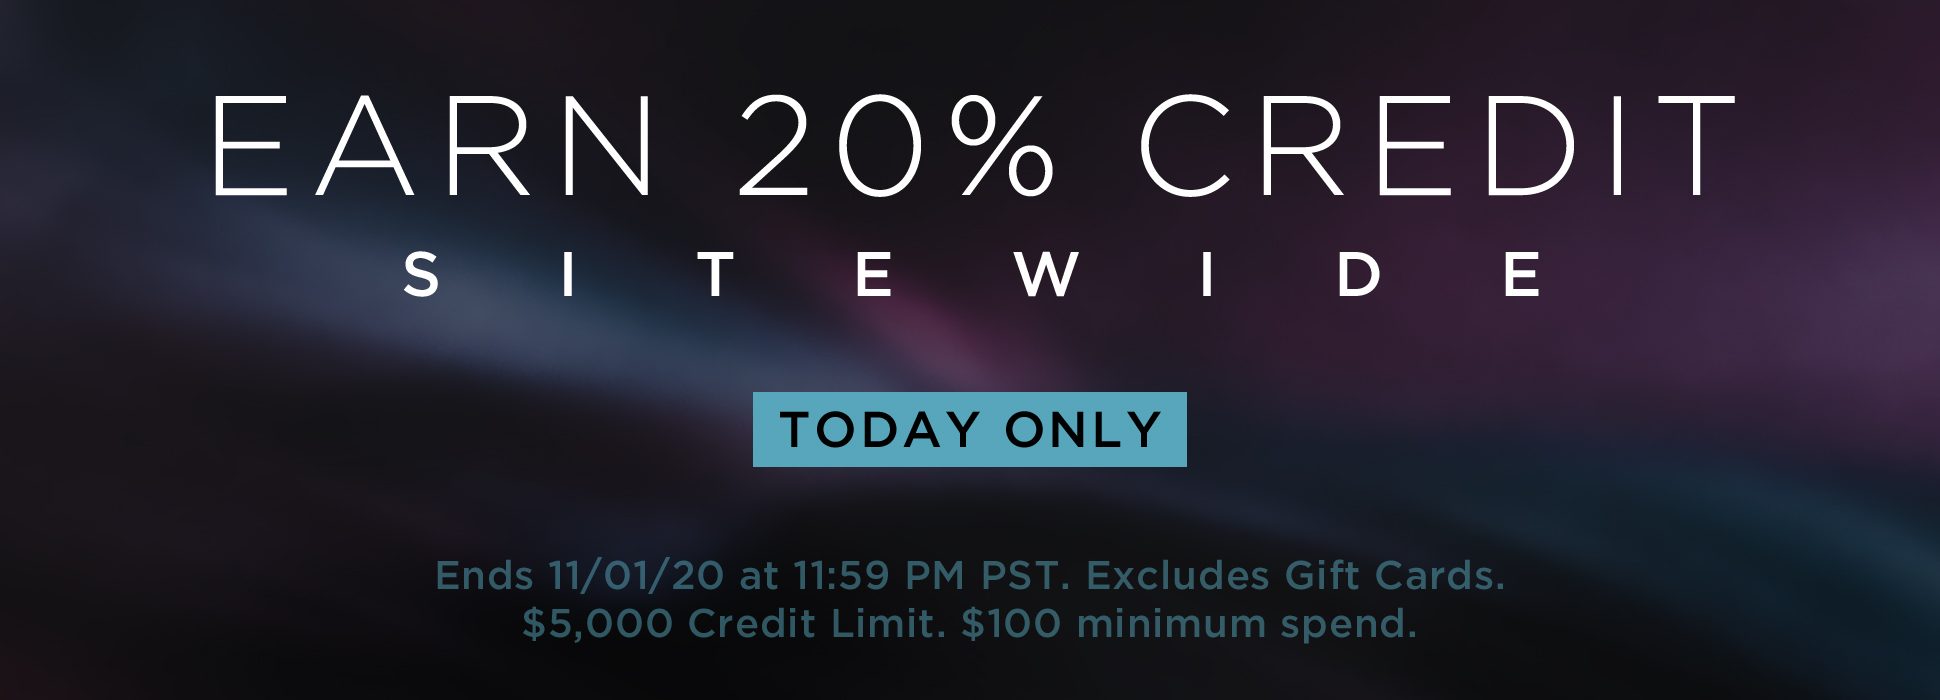 20% Credit Sitewide (Banners)